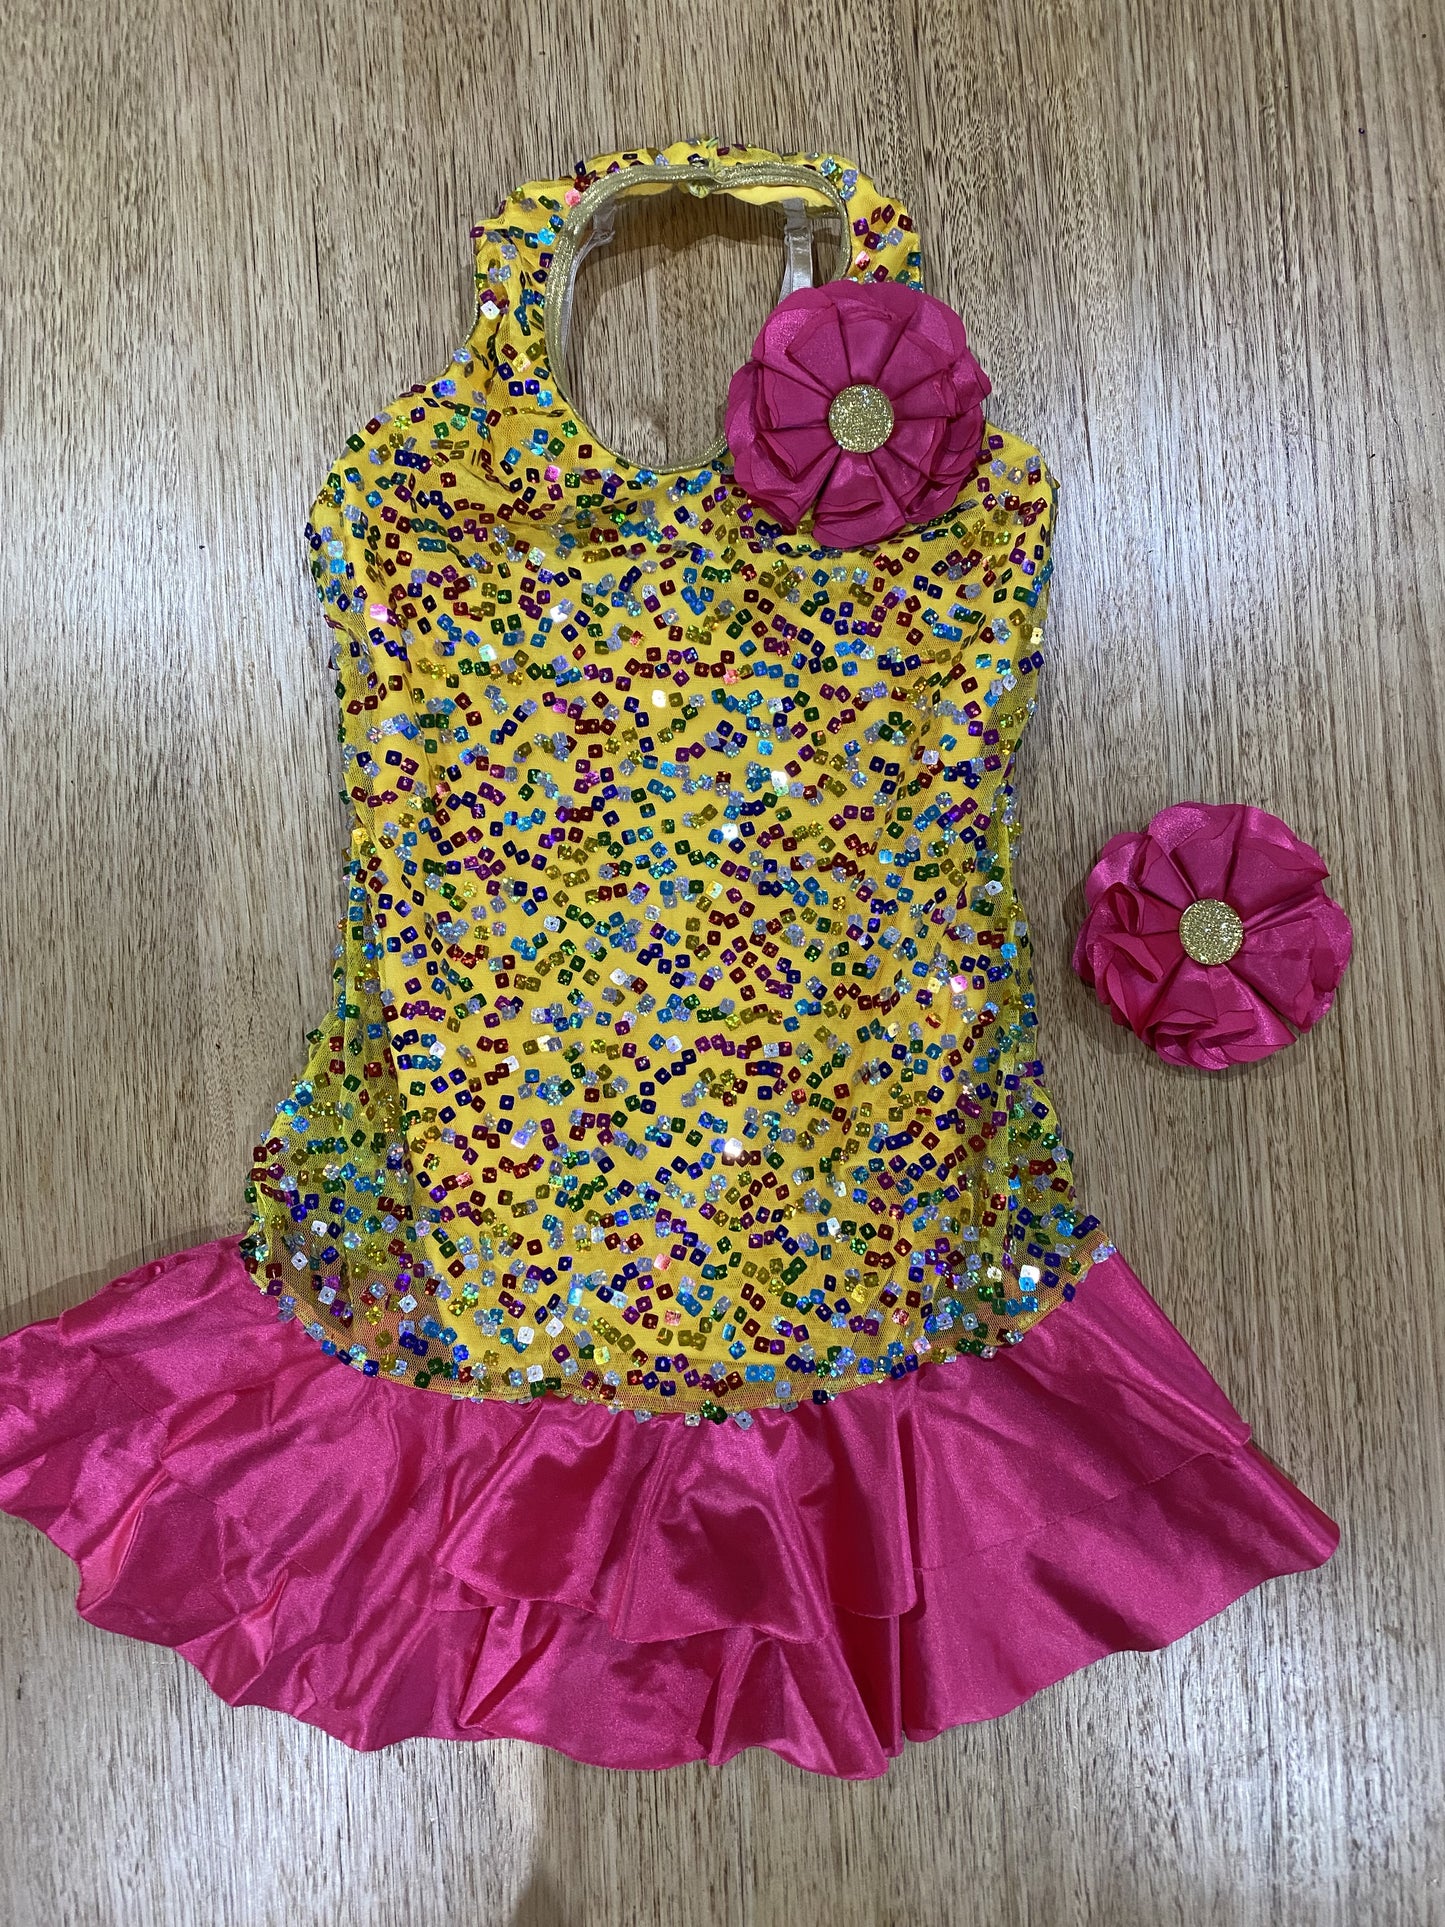 A5432 Walking on Sunshine - large child - colourful outfit with pink skirt with matching pink flower head piece